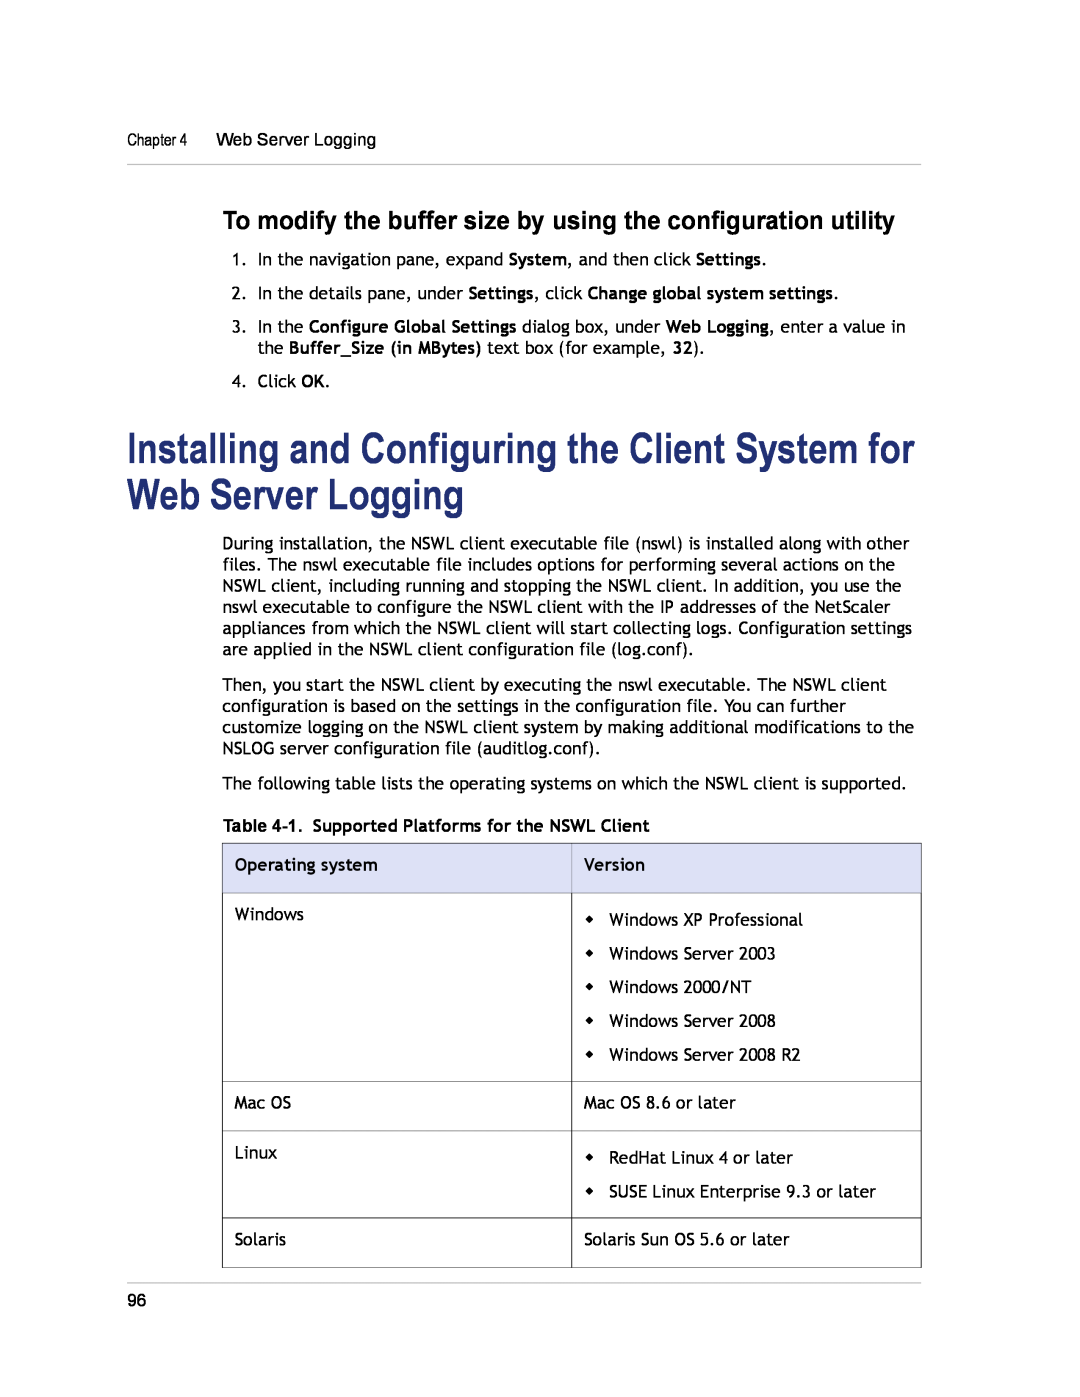 Citrix Systems CITRIX NETSCALER 9.3 manual Installing and Configuring the Client System for Web Server Logging, Version 